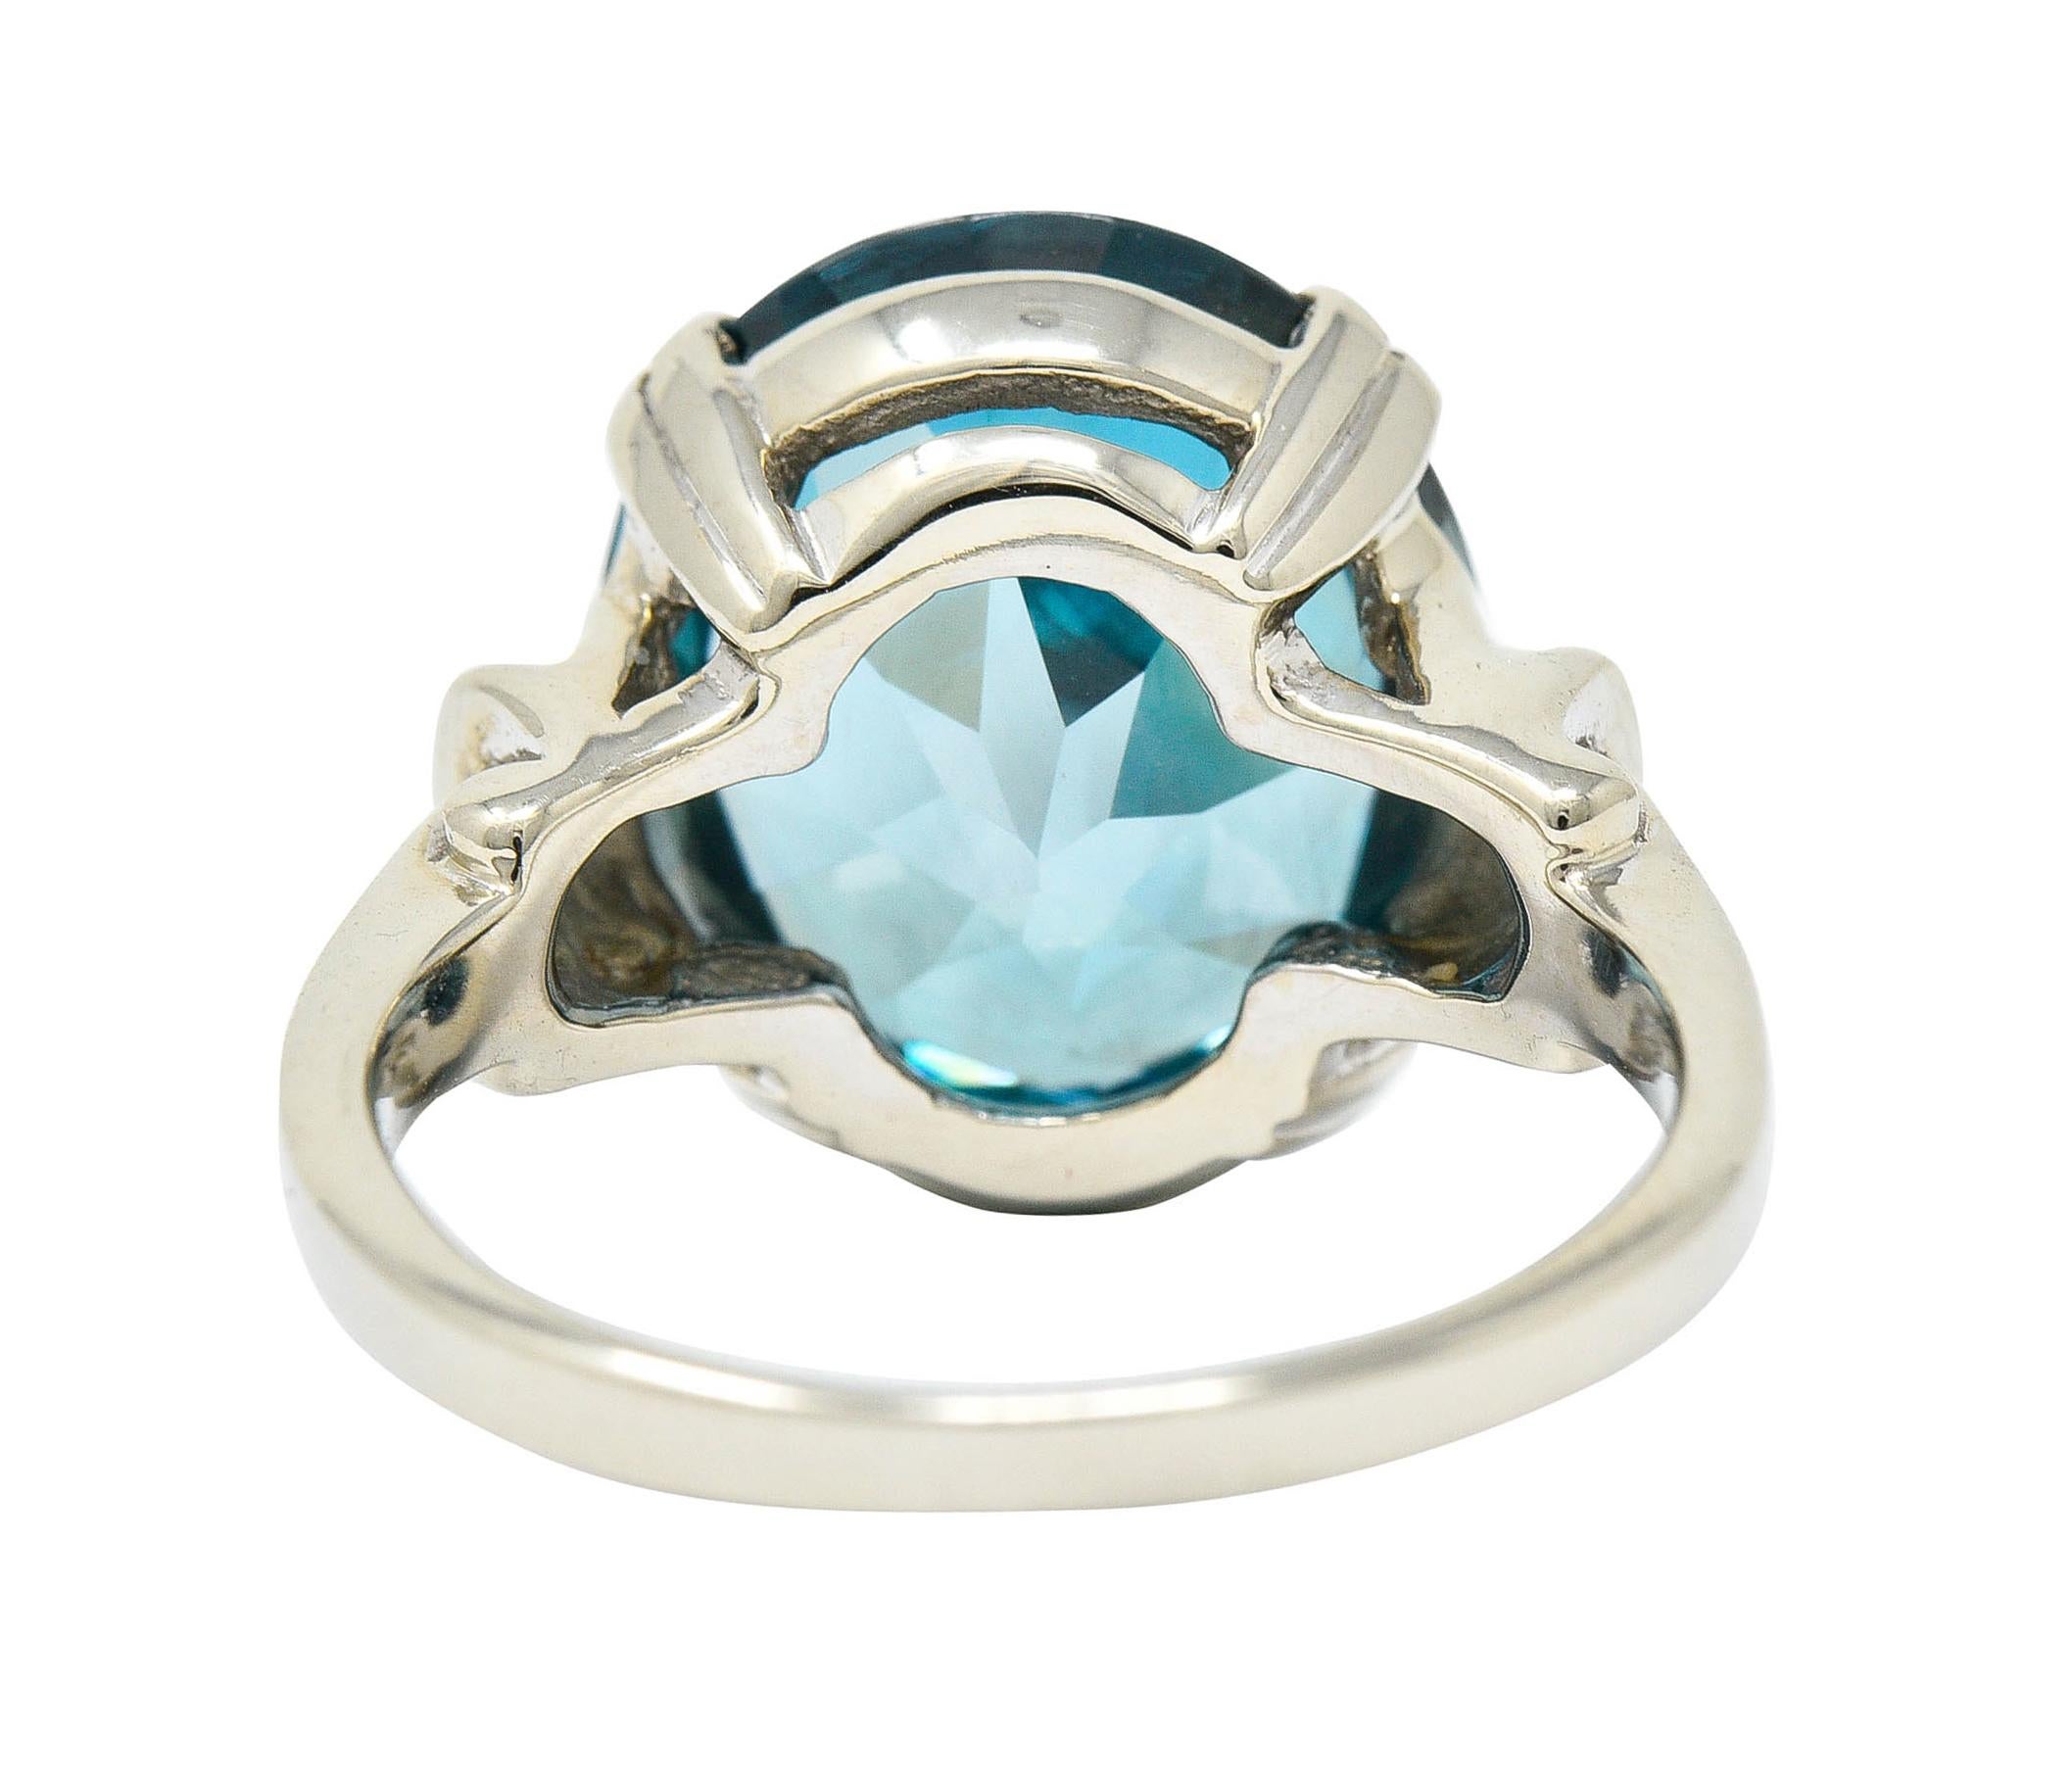 Centering an oval cut zircon measuring approximately 14.0 x 11.8 mm

Transparent with strong greenish blue color

Basket set by wide split prongs and flanked by stylized shoulders

Stamped 14K for 14 karat gold

Circa: 1940s

Ring Size: 5 3/4 &